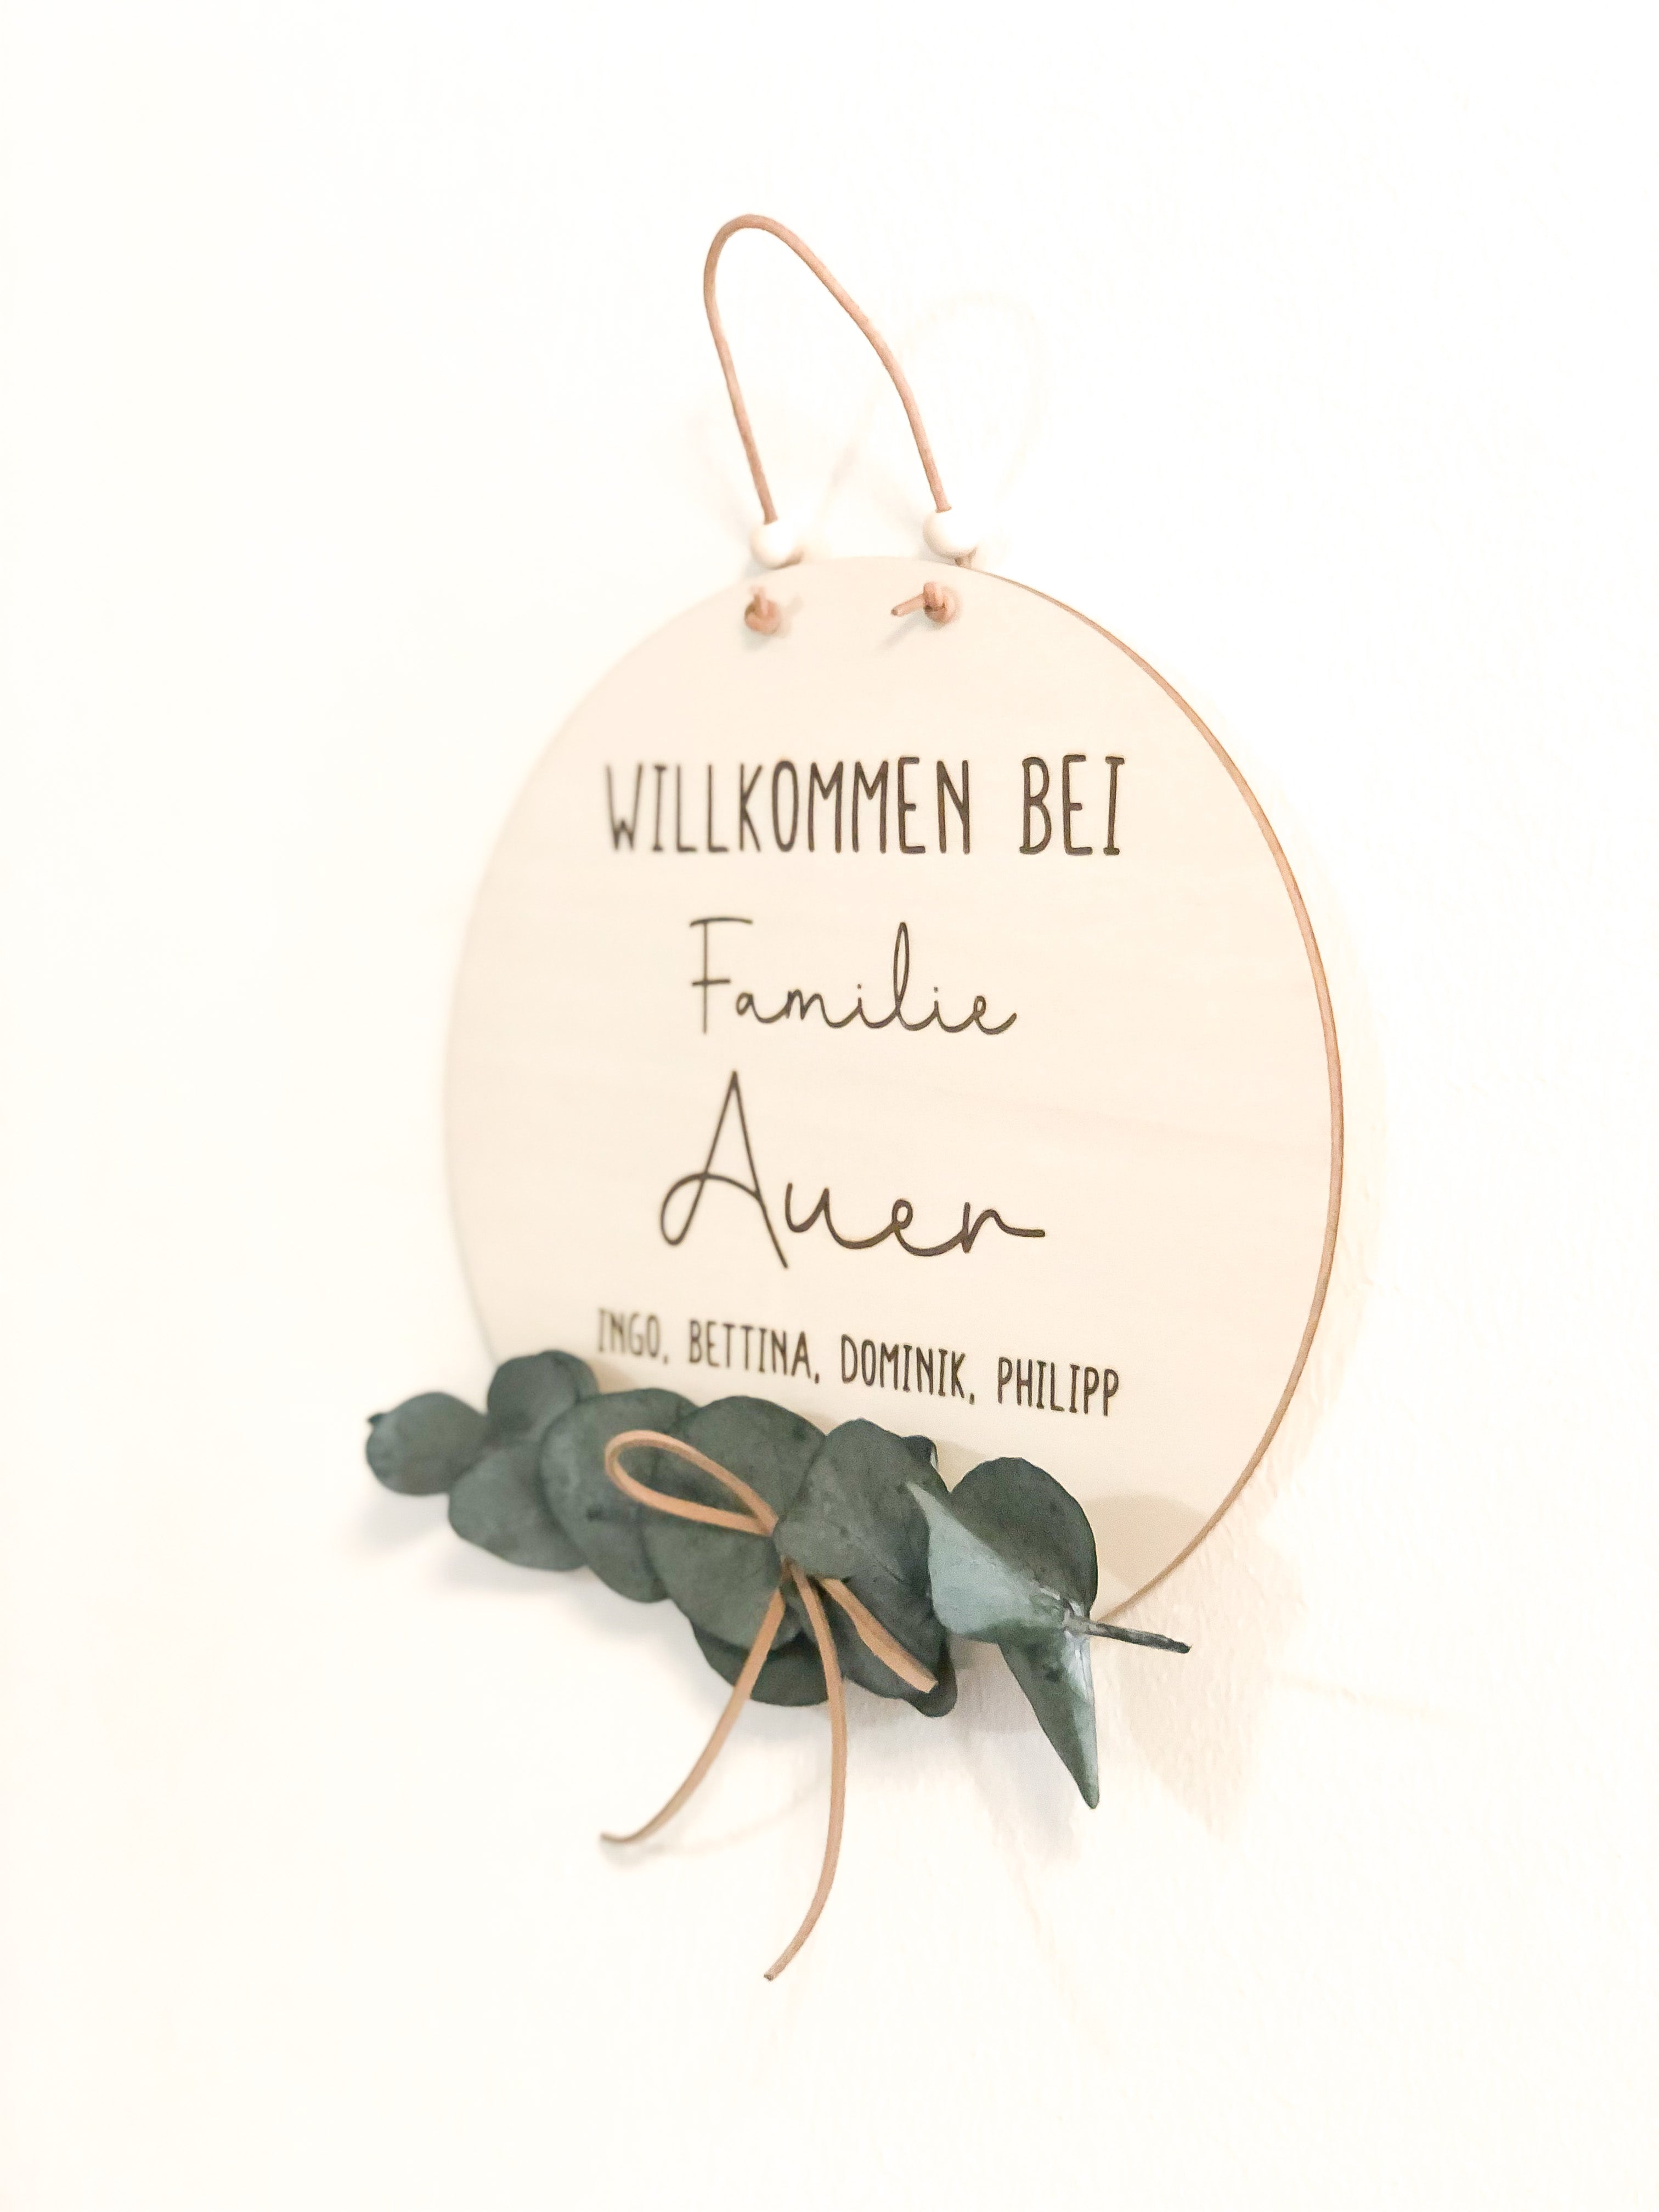 Family welcome sign personalized with dried eucalyptus